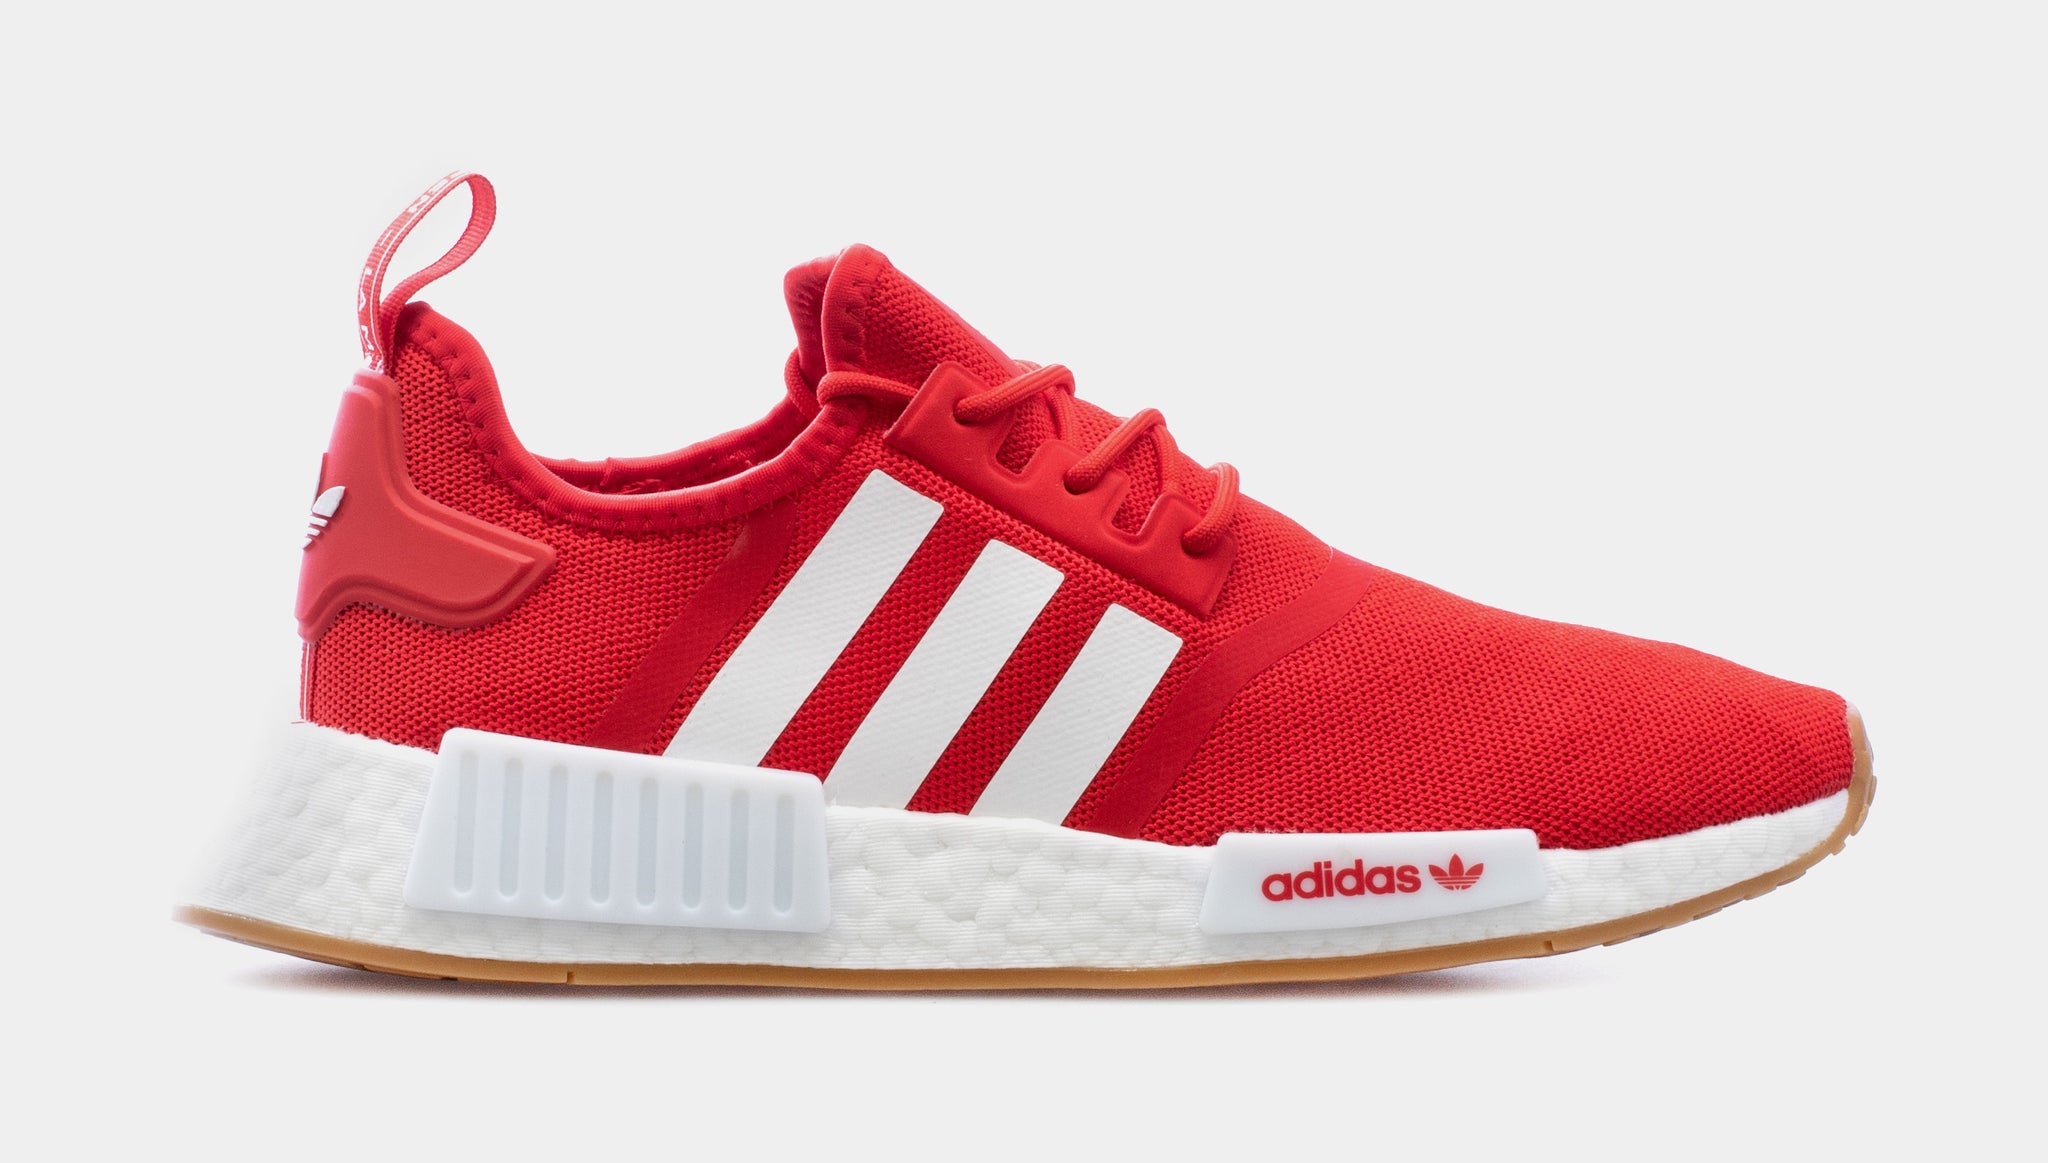 Taxi Independiente salir adidas NMD R1 Mens Lifestyle Shoes Red GY6056 – Shoe Palace